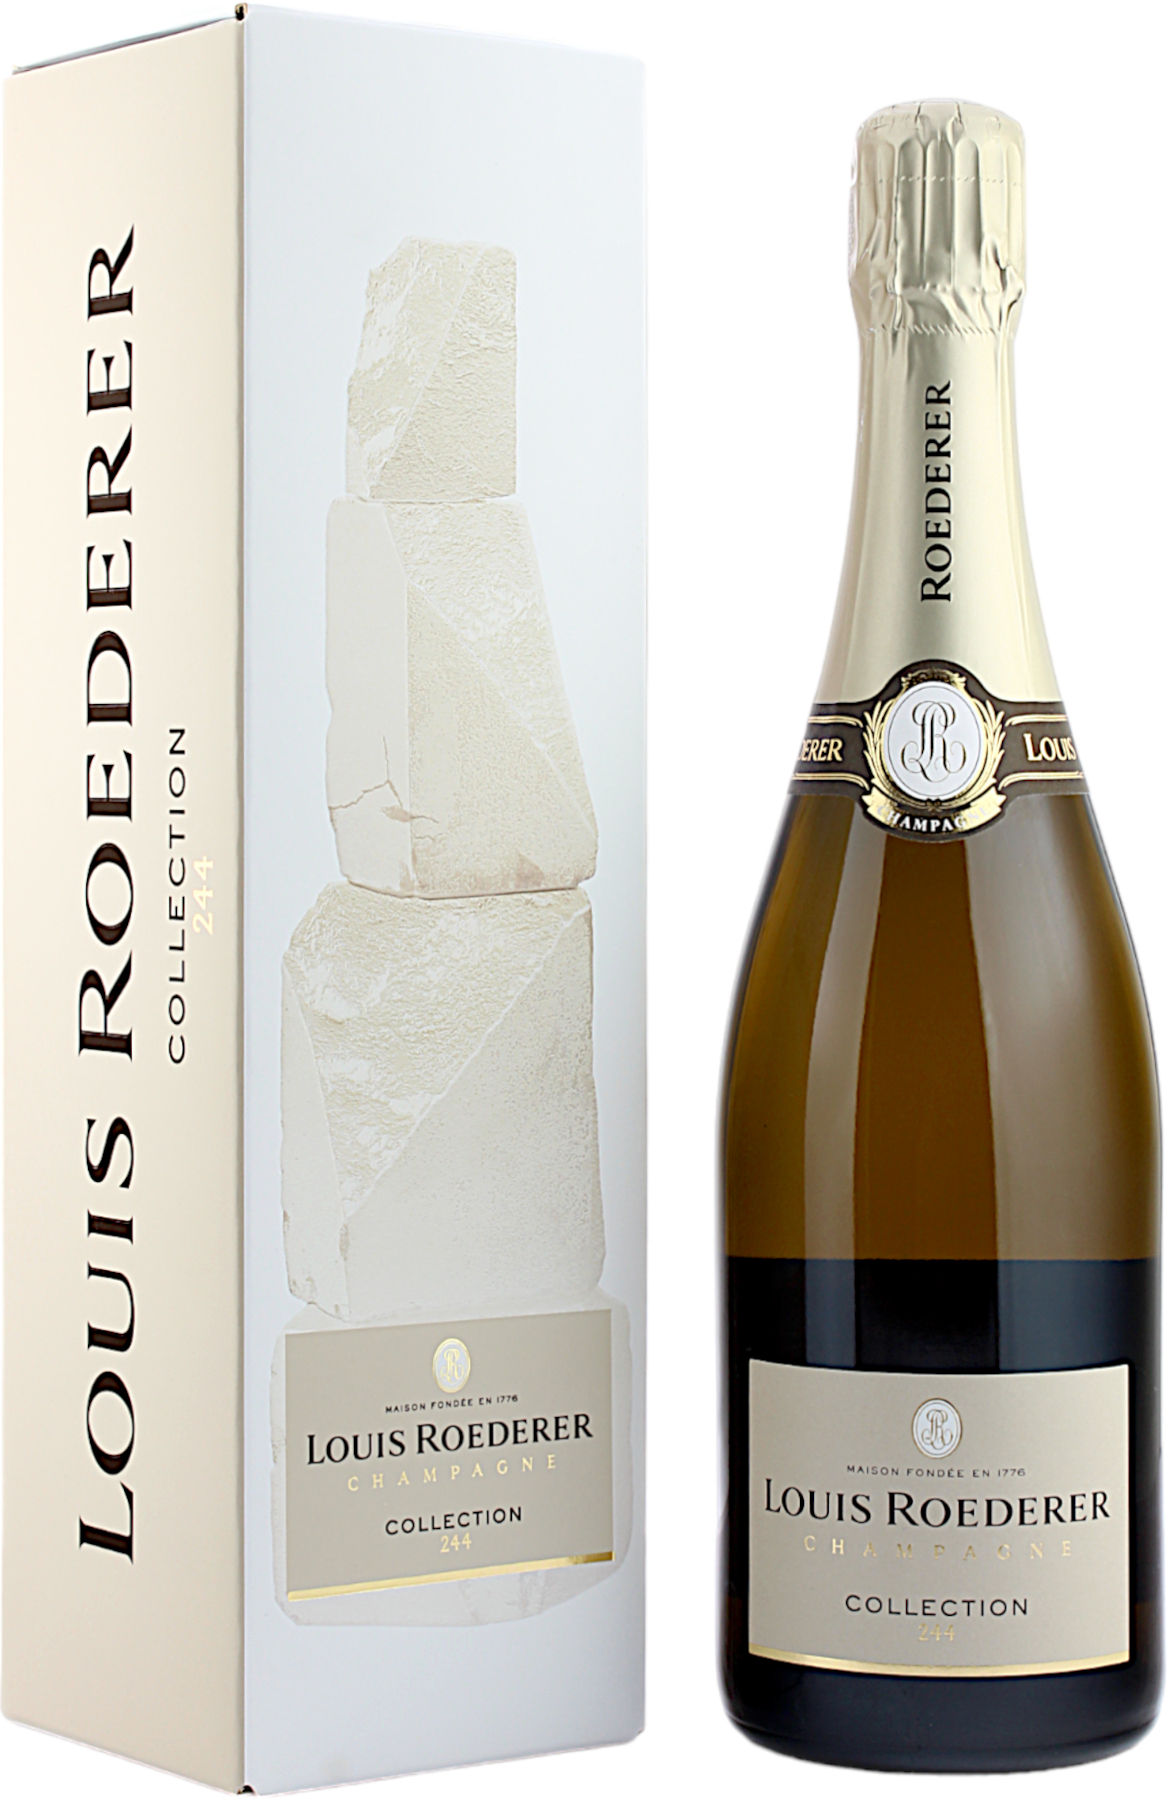 Louis Roederer Collection 244 Champagner Geschenkpackung 12.5% 0,75l